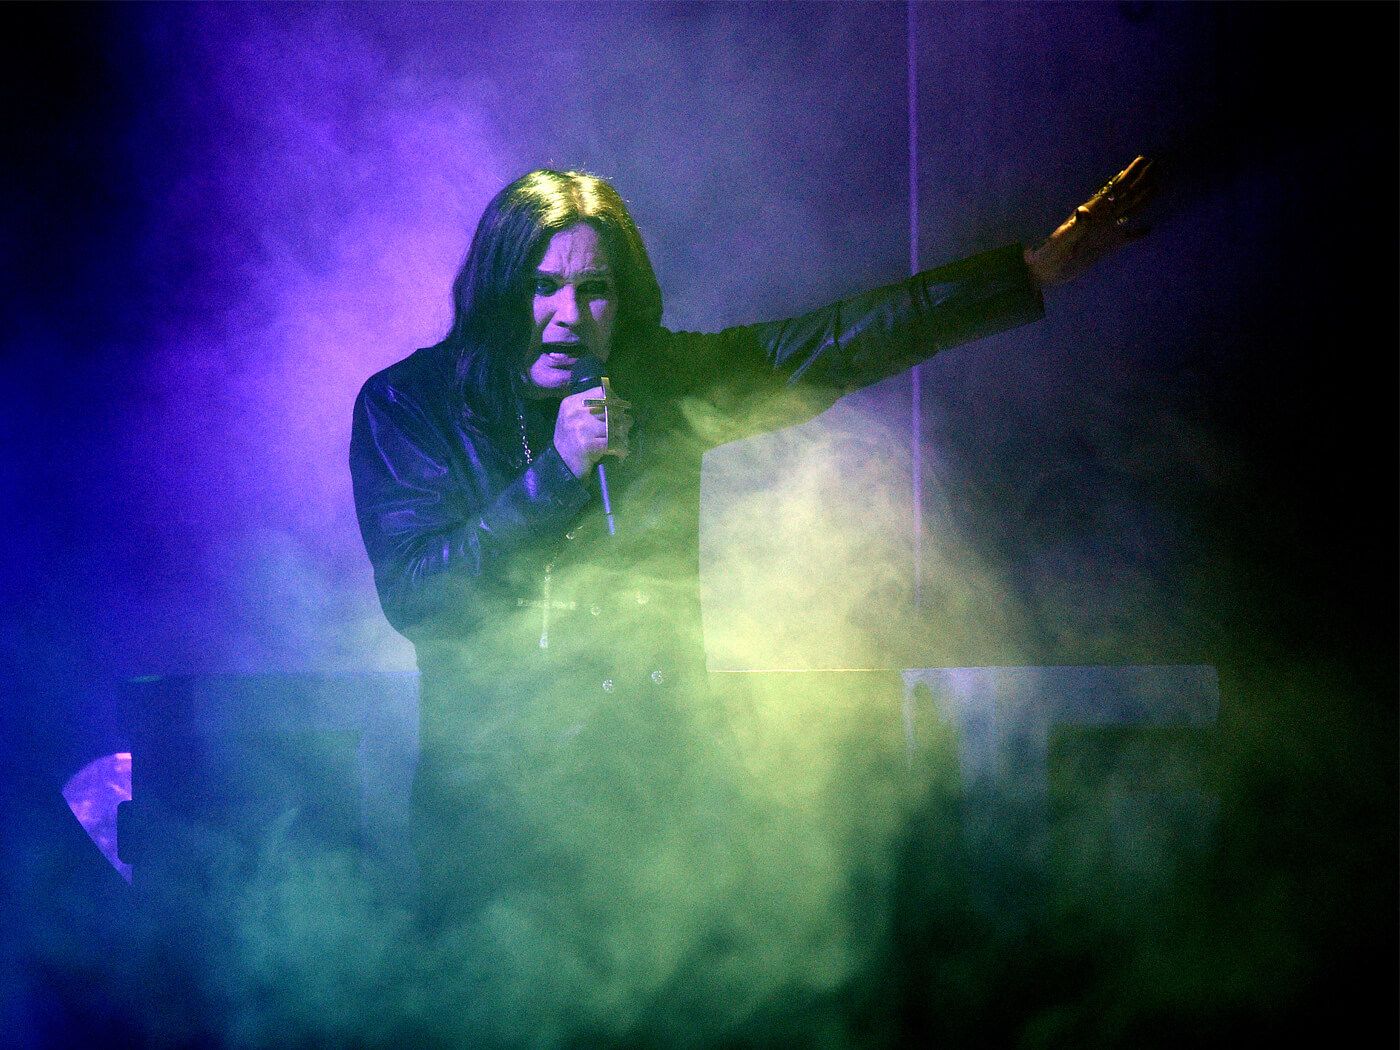 Ozzy Osbourne proves he's no 'Ordinary Man' with new album